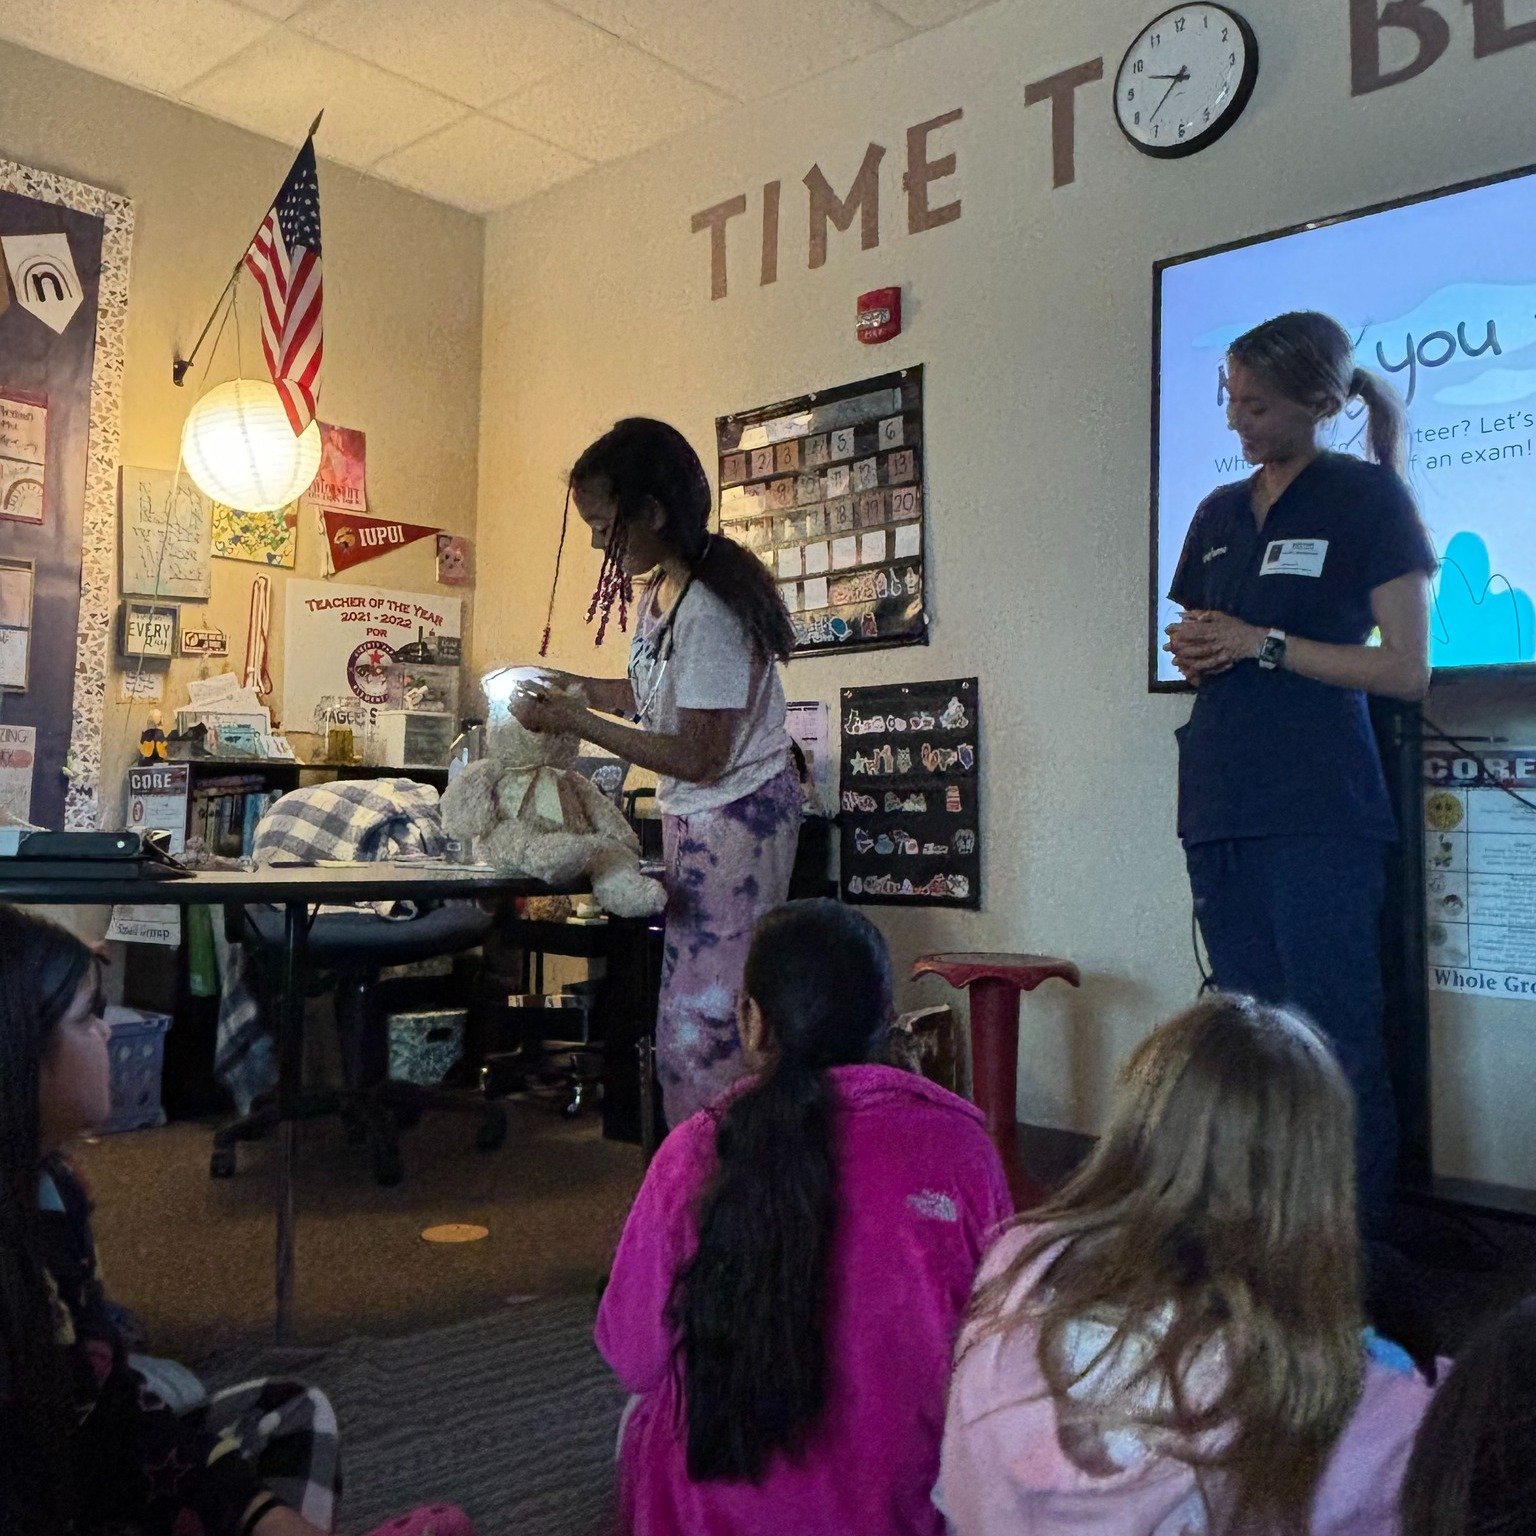 One of our core values at AEAC is sharing our knowledge with others! That can include clients, veterinary students, high school students, or in this case, fourth graders! One of our team members recently visited a local elementary school to share the